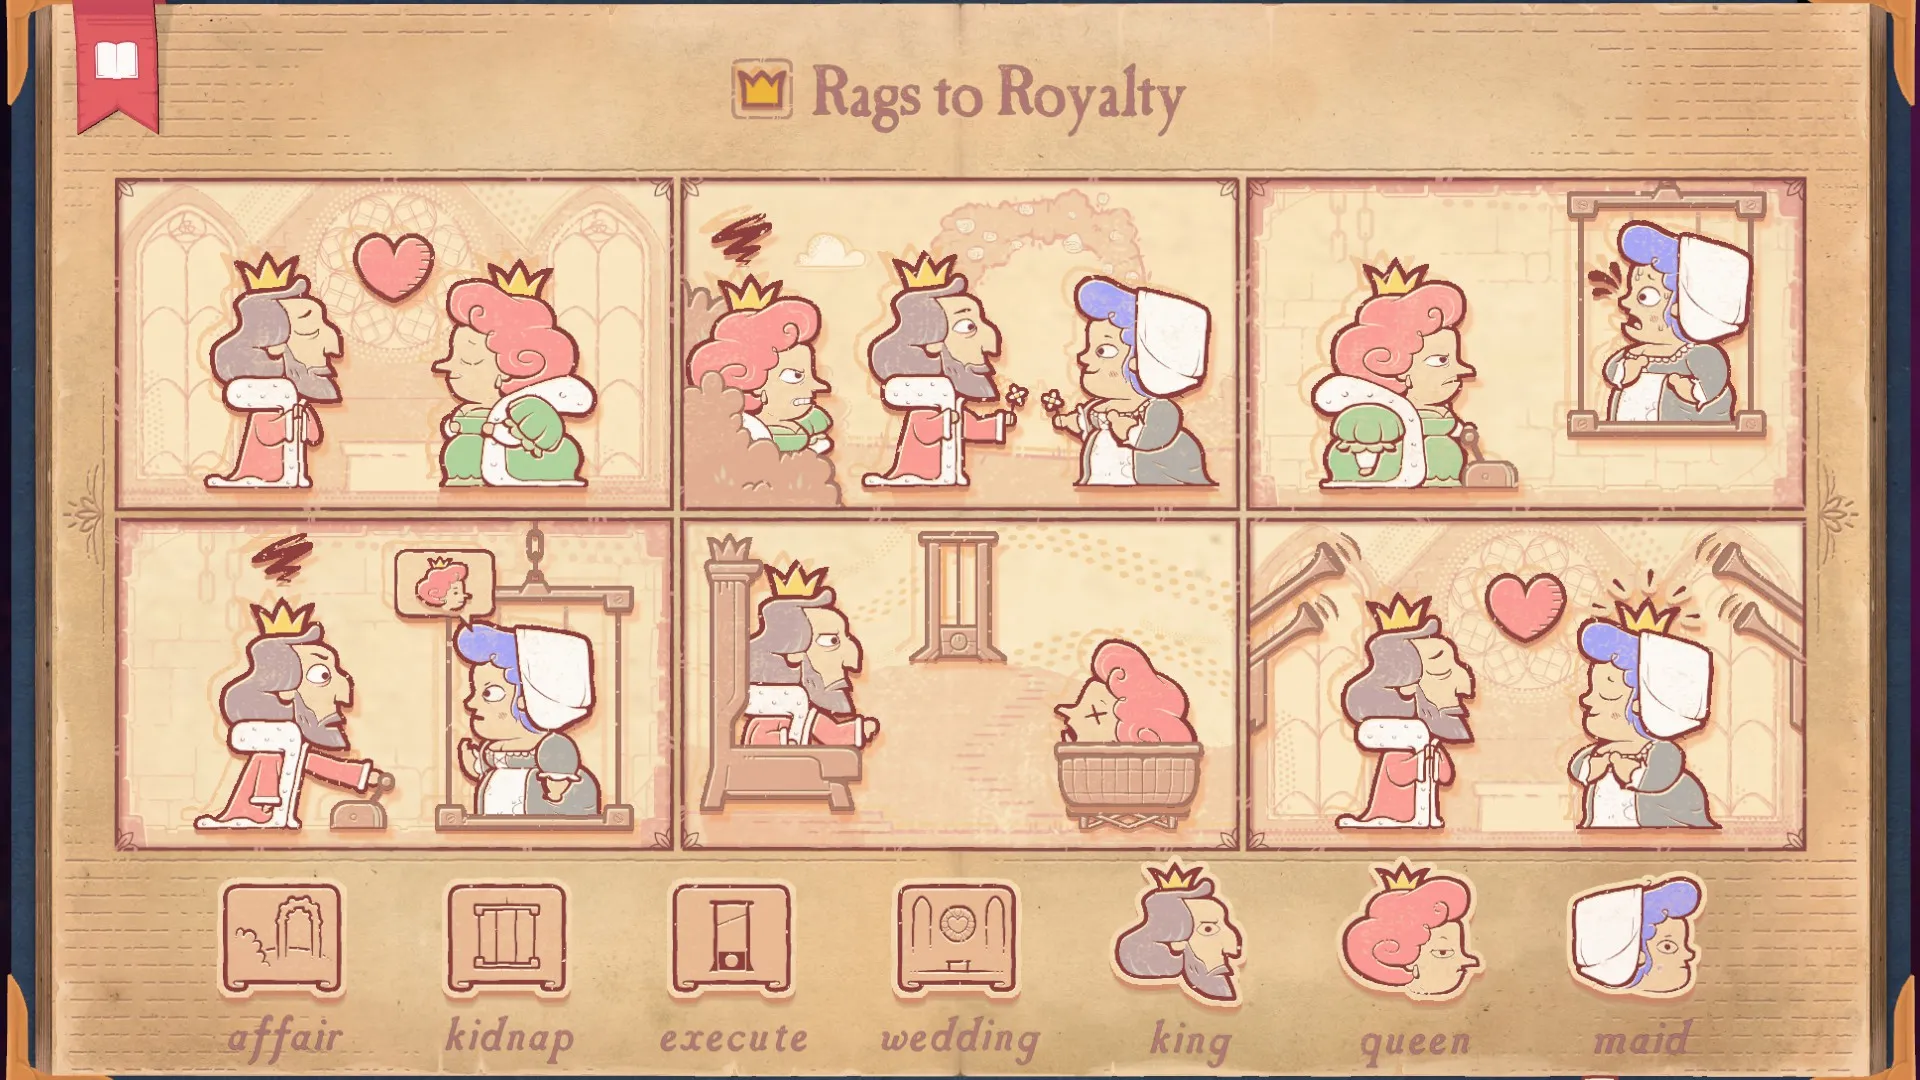 The solution for the Promotion section of Storyteller, showing the Maid go from rags to riches.